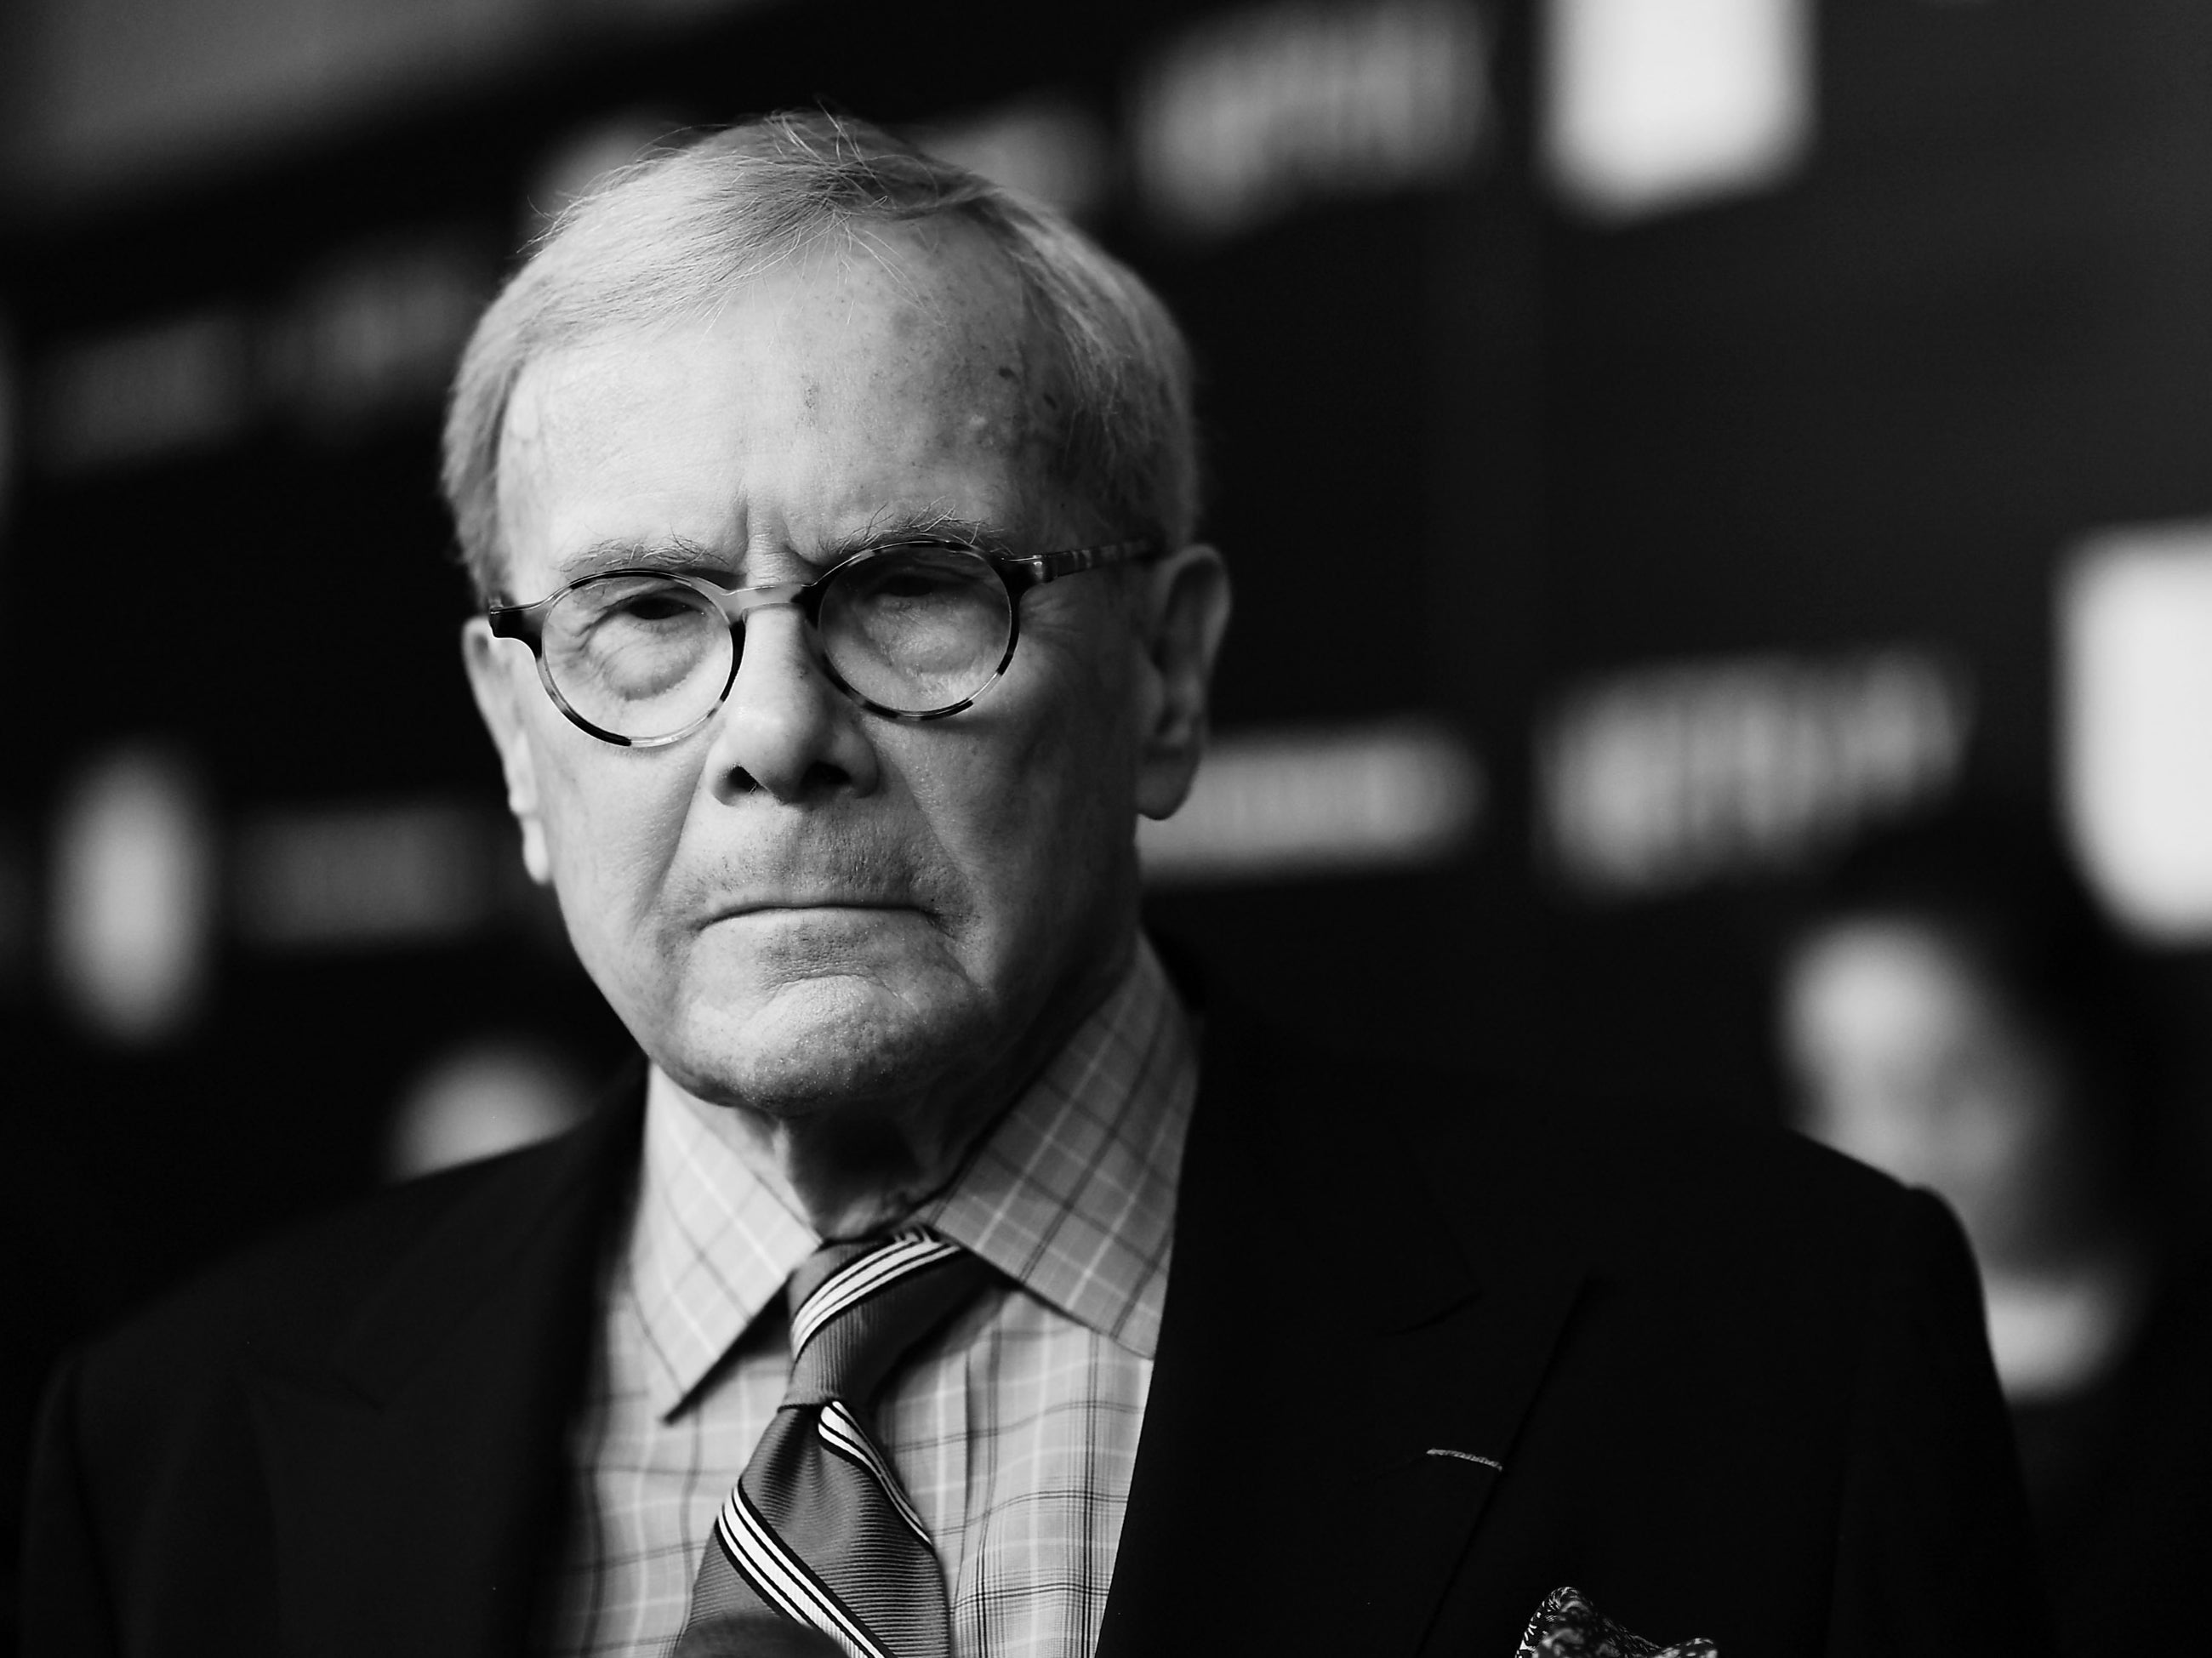 Tom Brokaw announces retirement from NBC News after 55 years